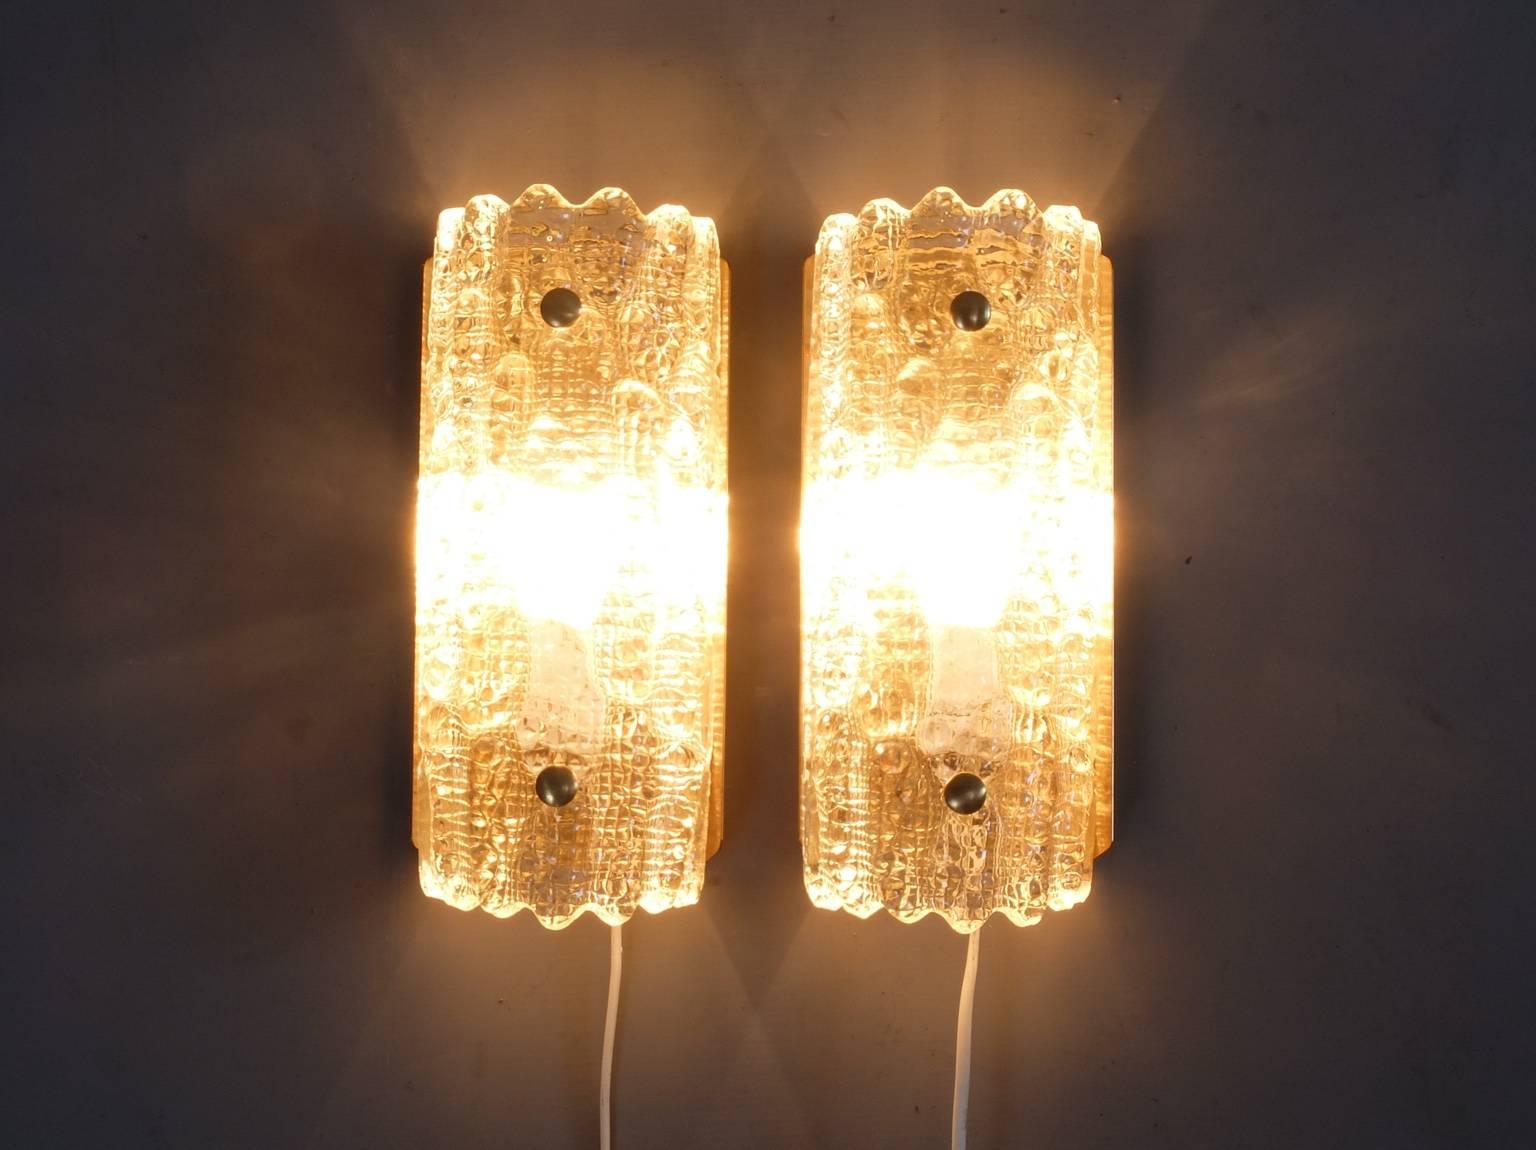 A pair of beautiful wall lights or sconces designed by Carl Fagerlund and manufactured by Danish lighting company Lyfa in the 1960s. The textured glass shades are by Swedish glass company Orrefors and are without chips or cracks. The glass is